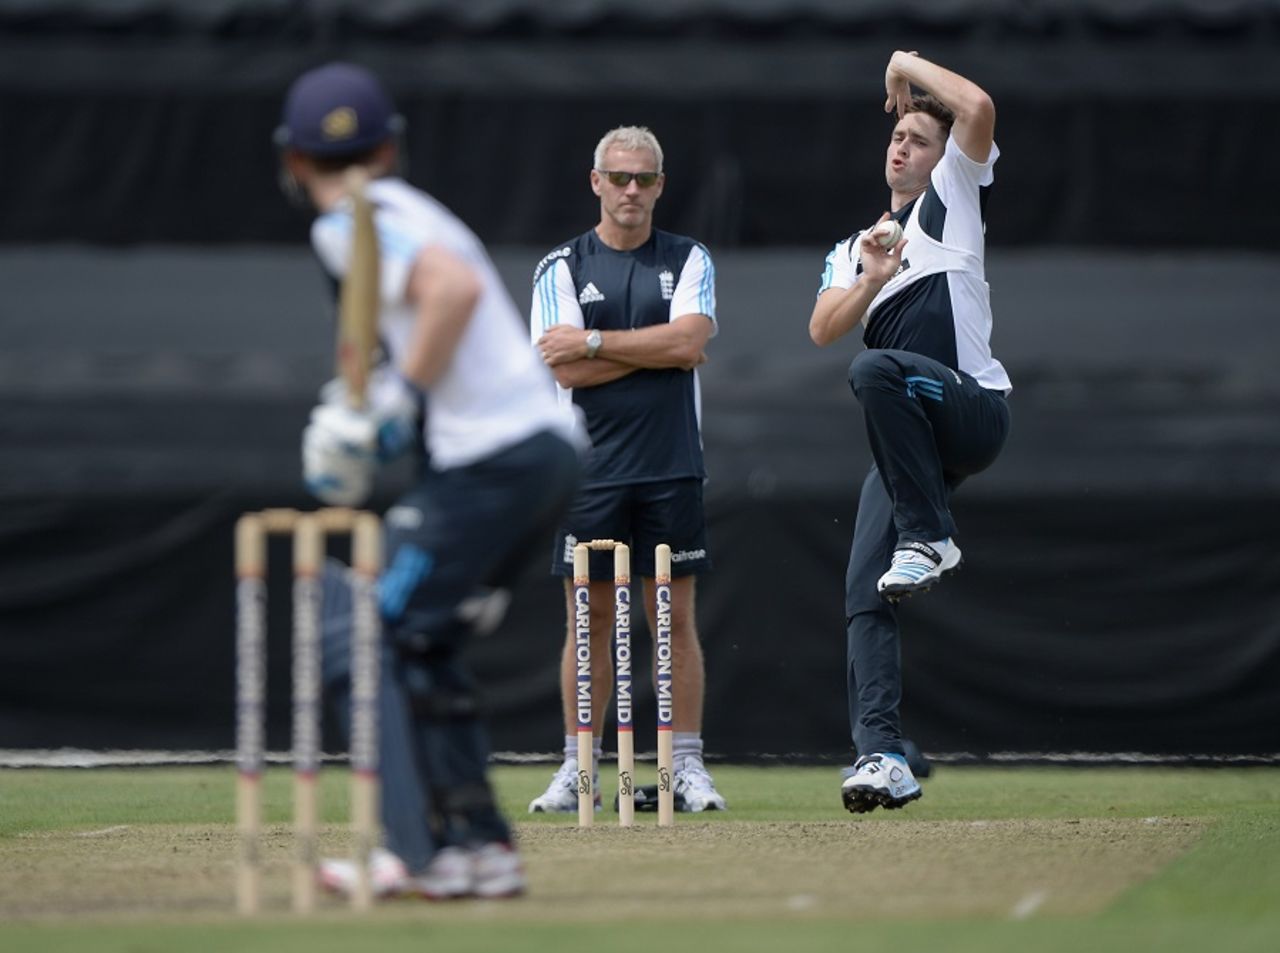 Peter Moores umpires as Chris Woakes bowls during a match simulation, Canberra, January 10, 2015